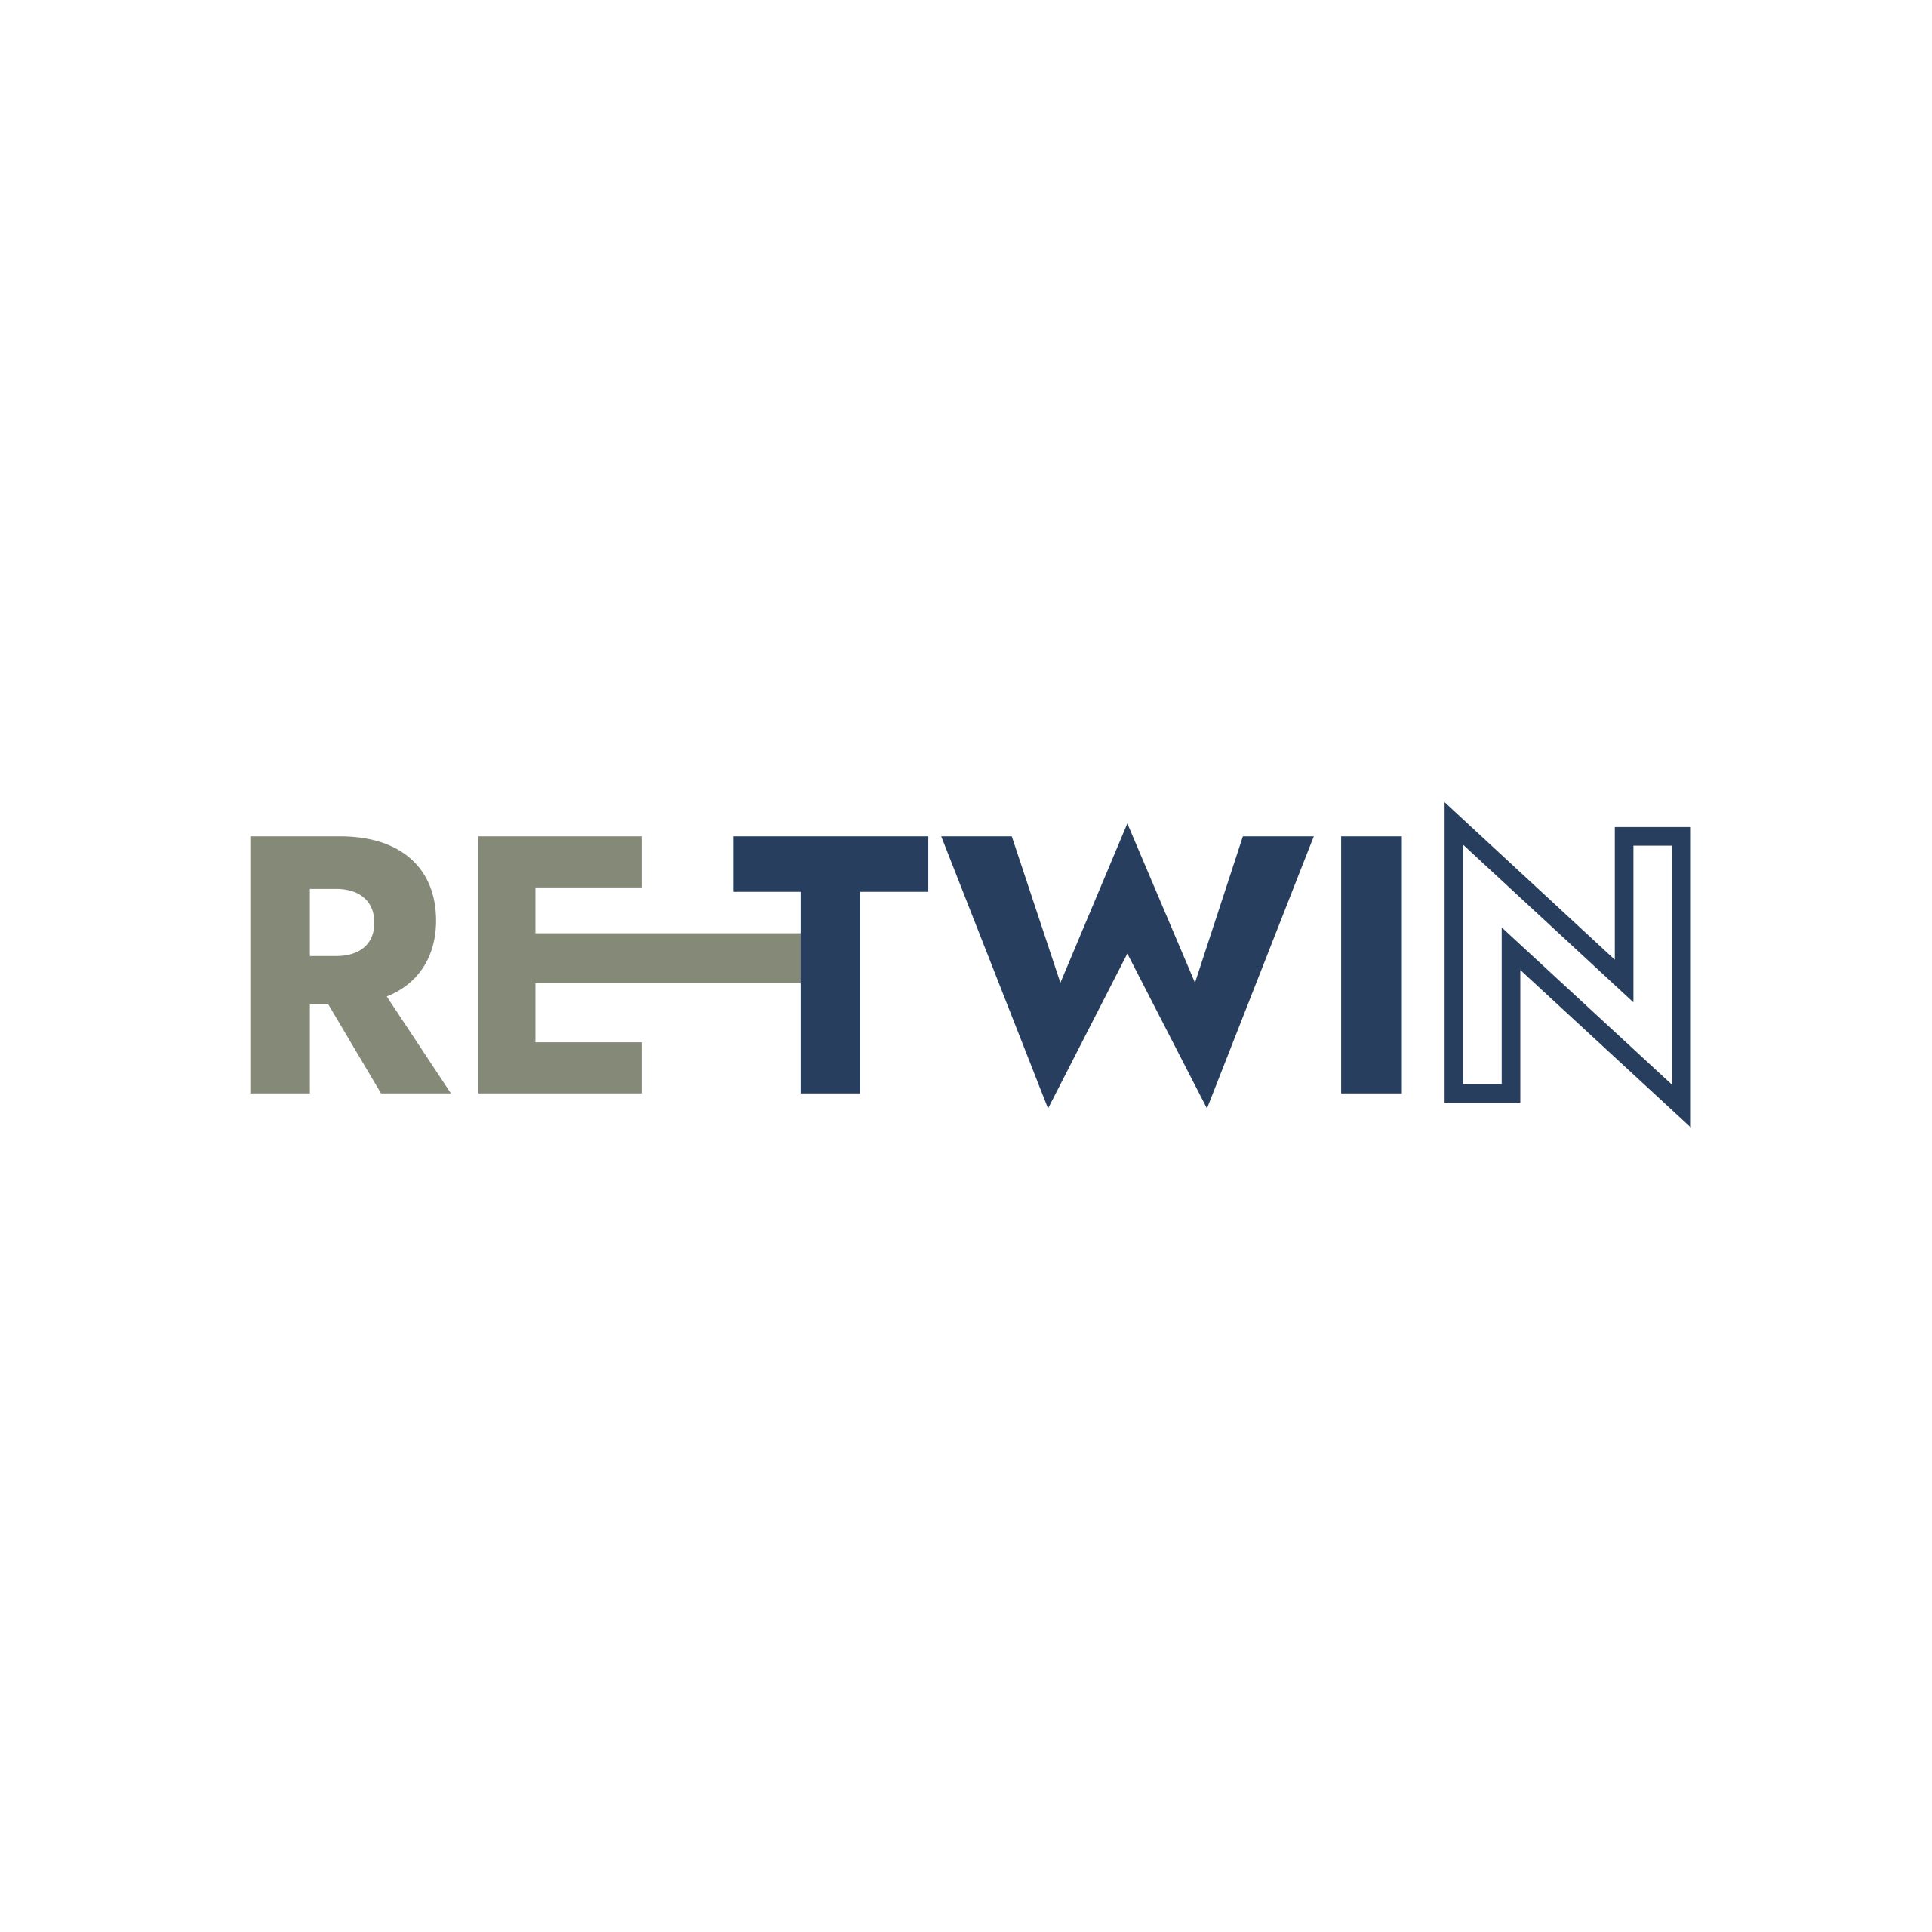 Re-twin